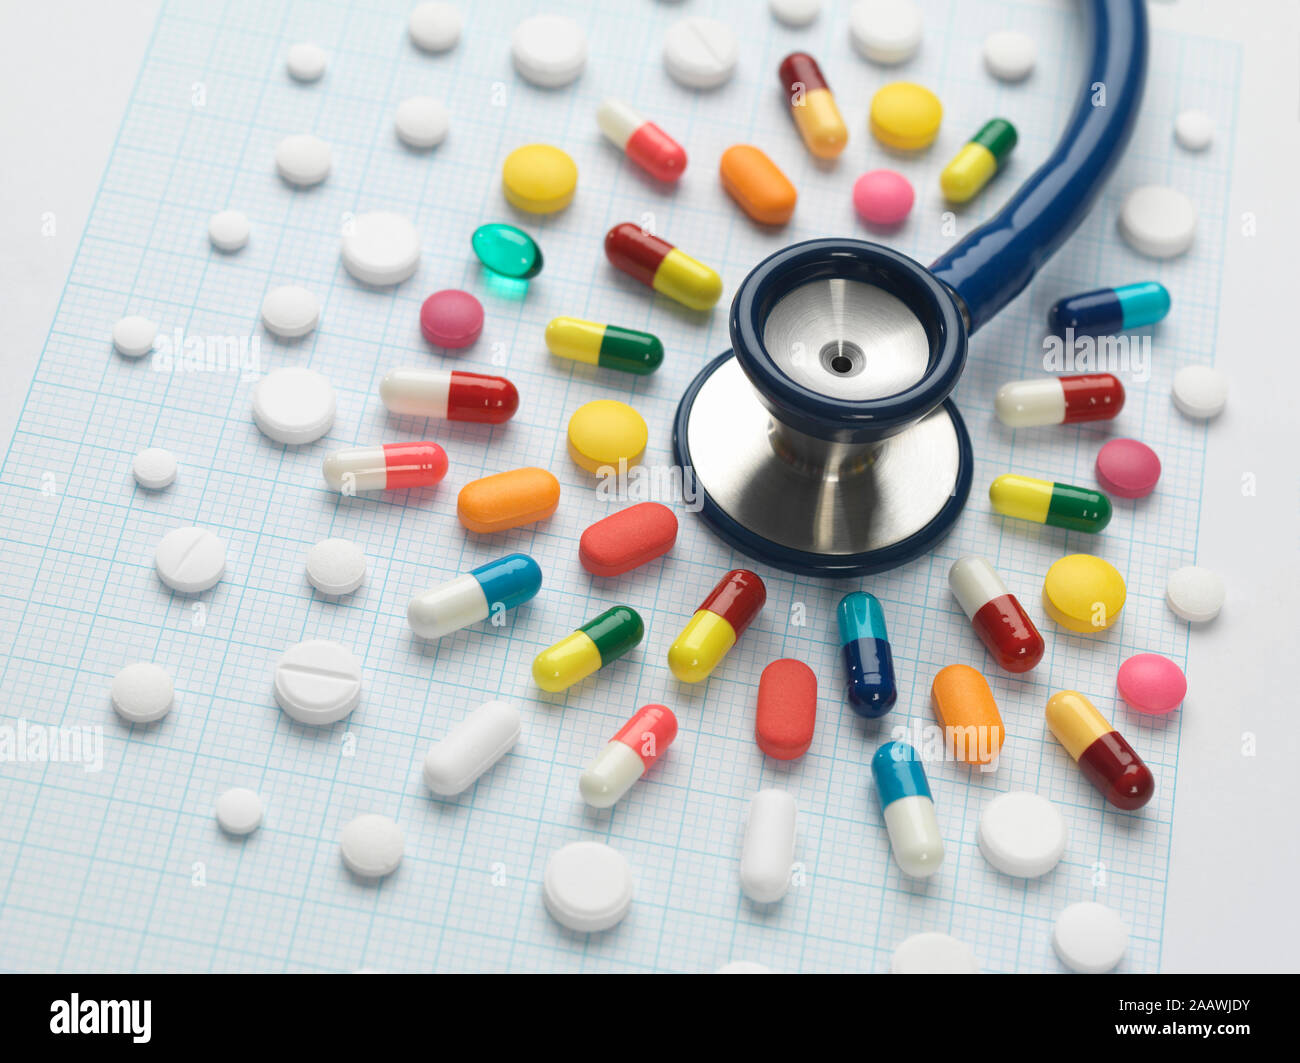 High angle view of colorful medicines arranged around stethoscope on graph paper Stock Photo